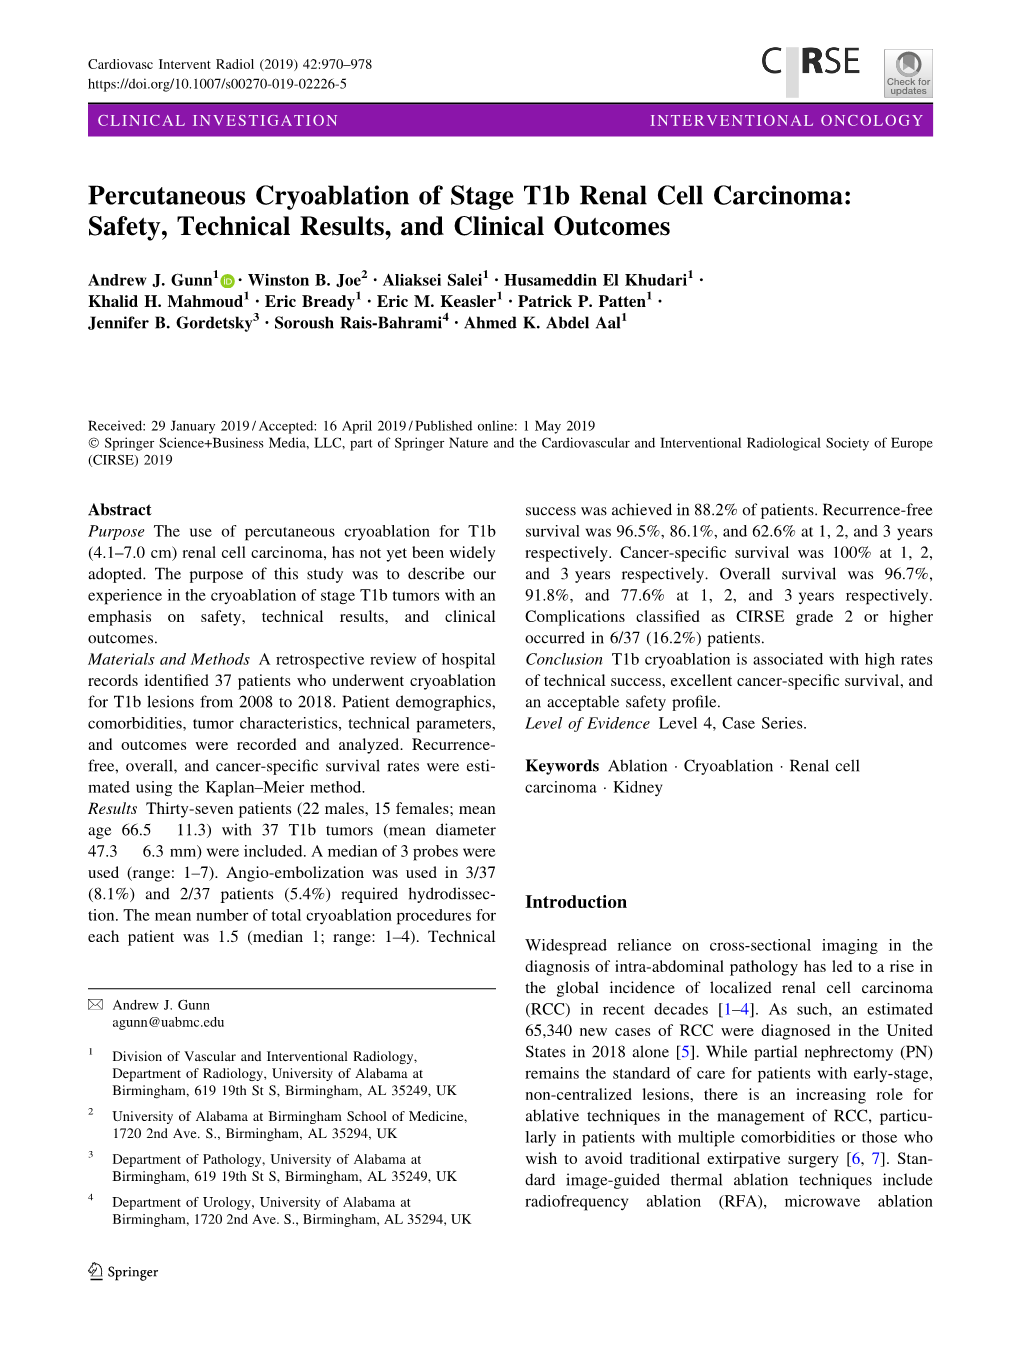 Percutaneous Cryoablation of Stage T1b Renal Cell Carcinoma: Safety, Technical Results, and Clinical Outcomes